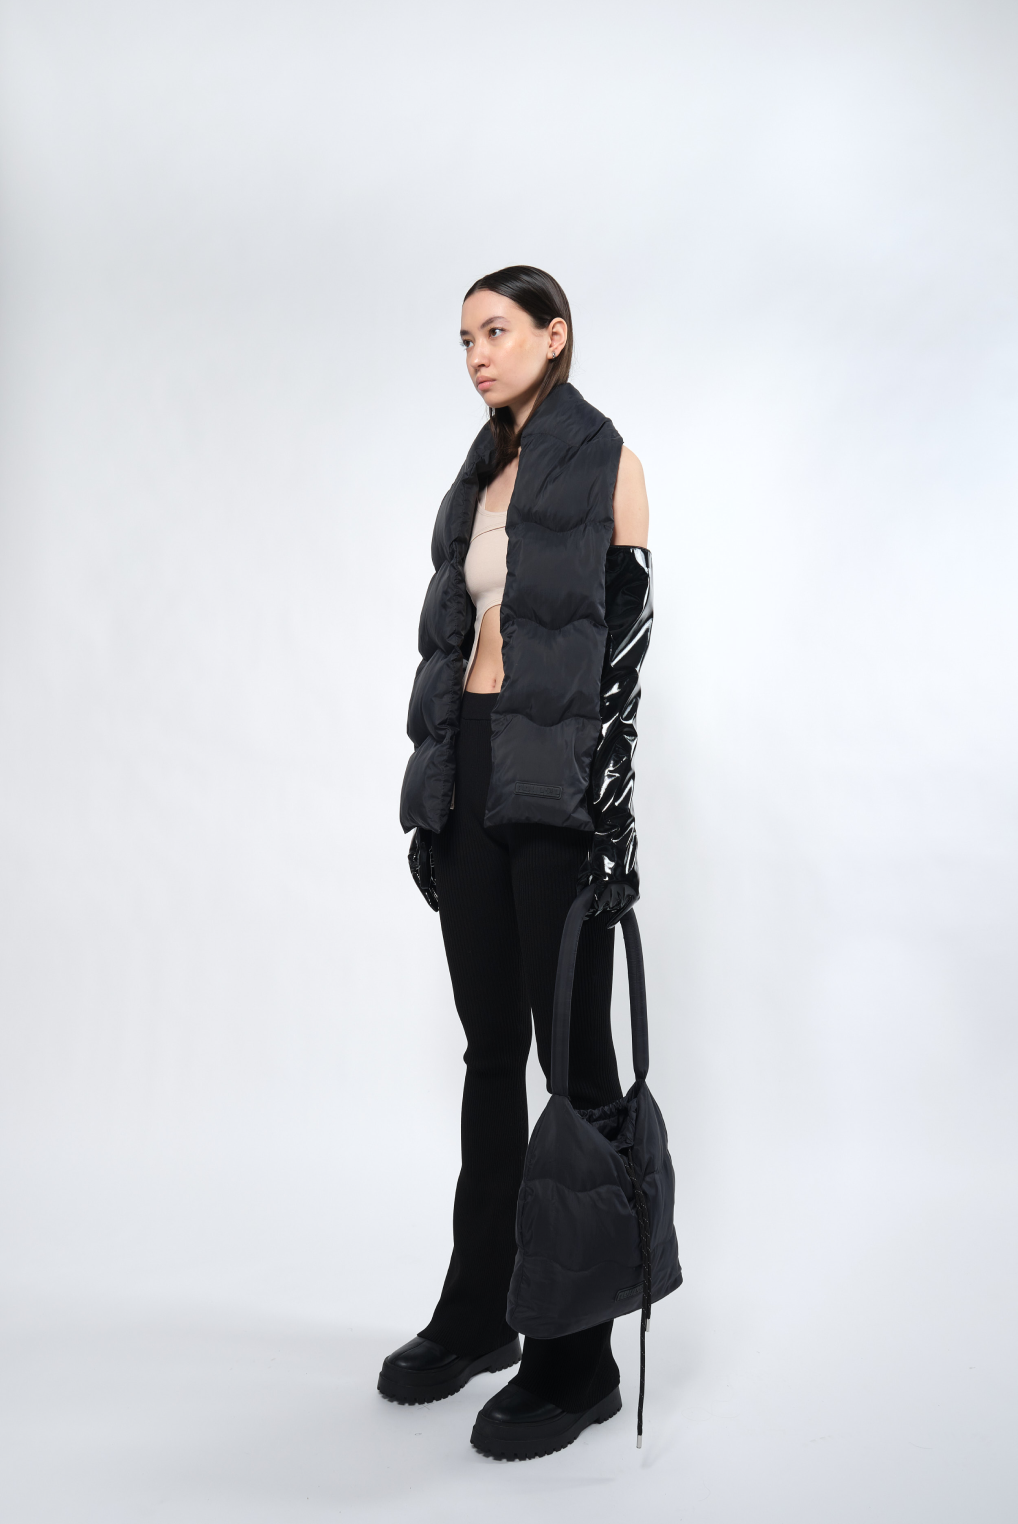  Re:Down® Black Puffer Scarf - Adhere To  - 3